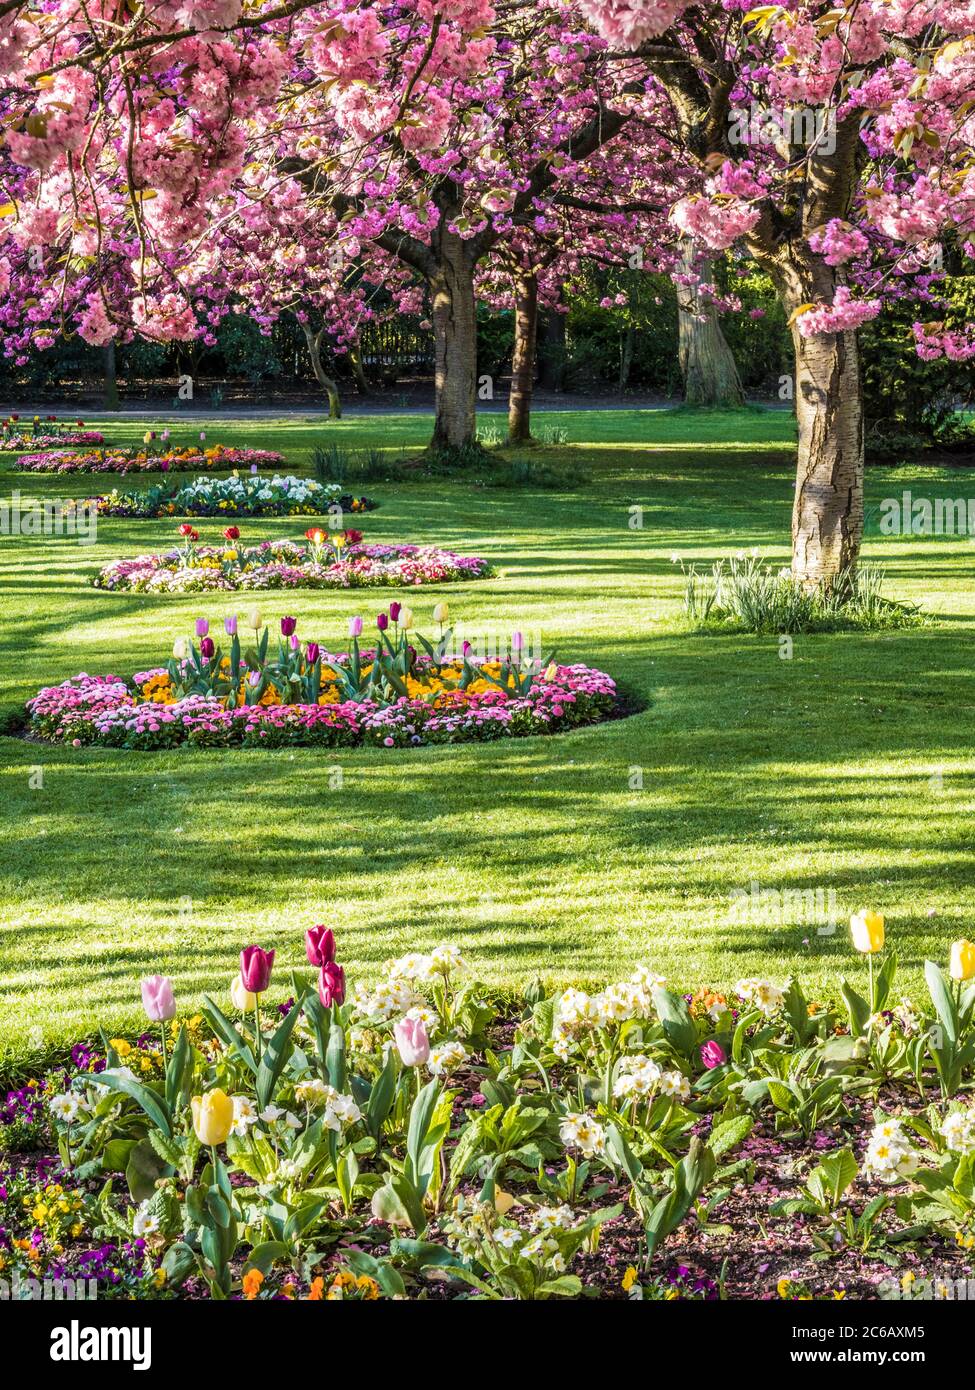 Flower beds of tulips, polyanthus and Bellis daisies and flowering pink cherry trees in an urban public park in England. Stock Photo